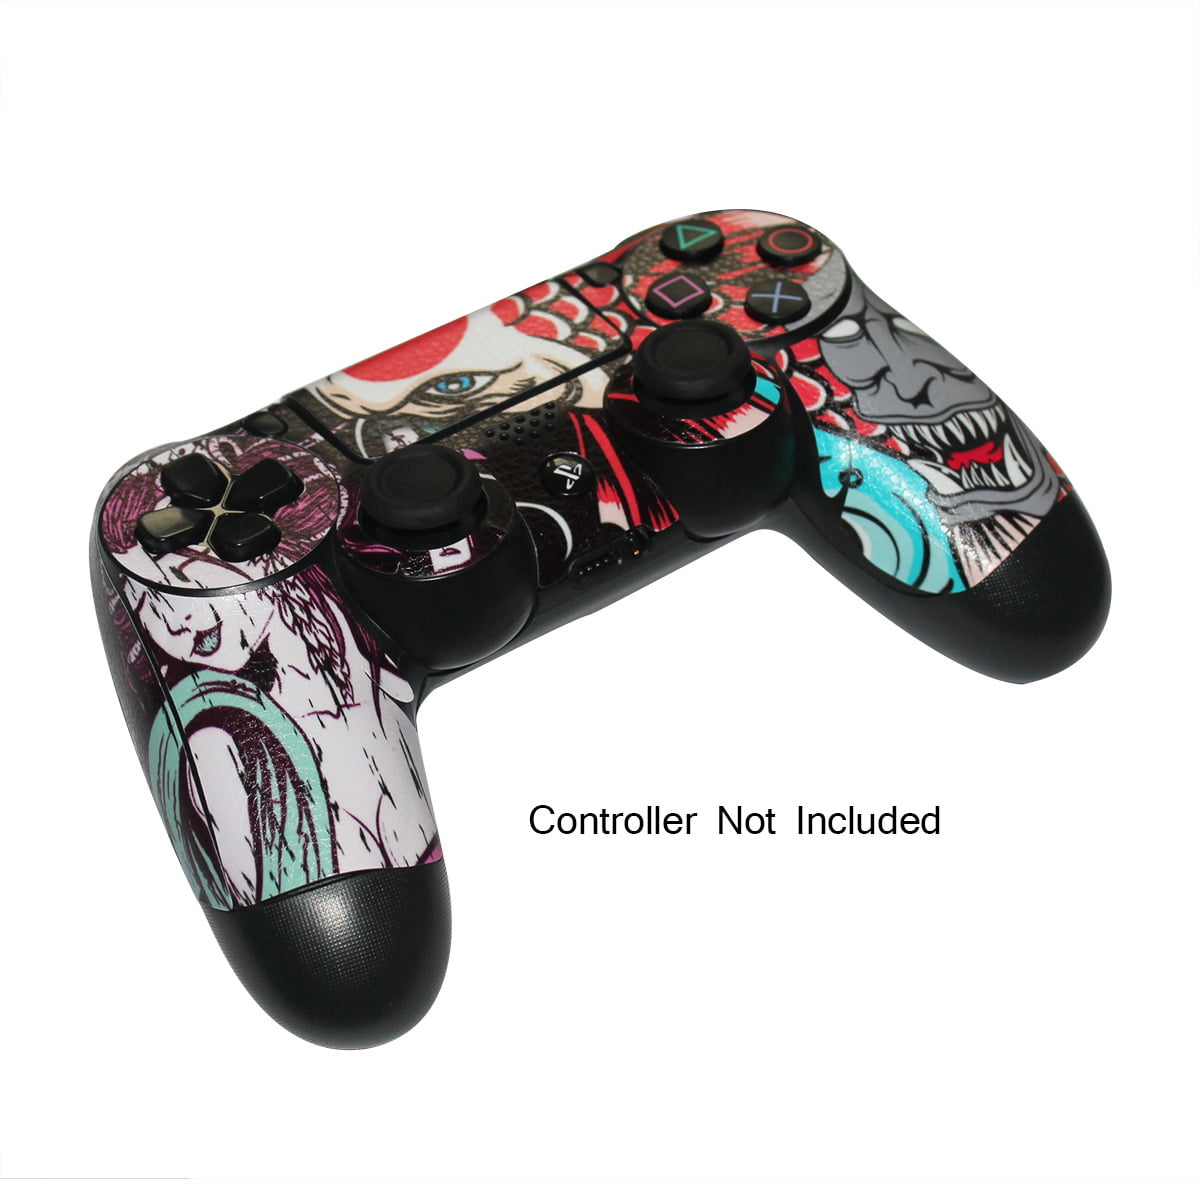  Skinit Decal Gaming Skin for PS4 Pro/Slim Controller